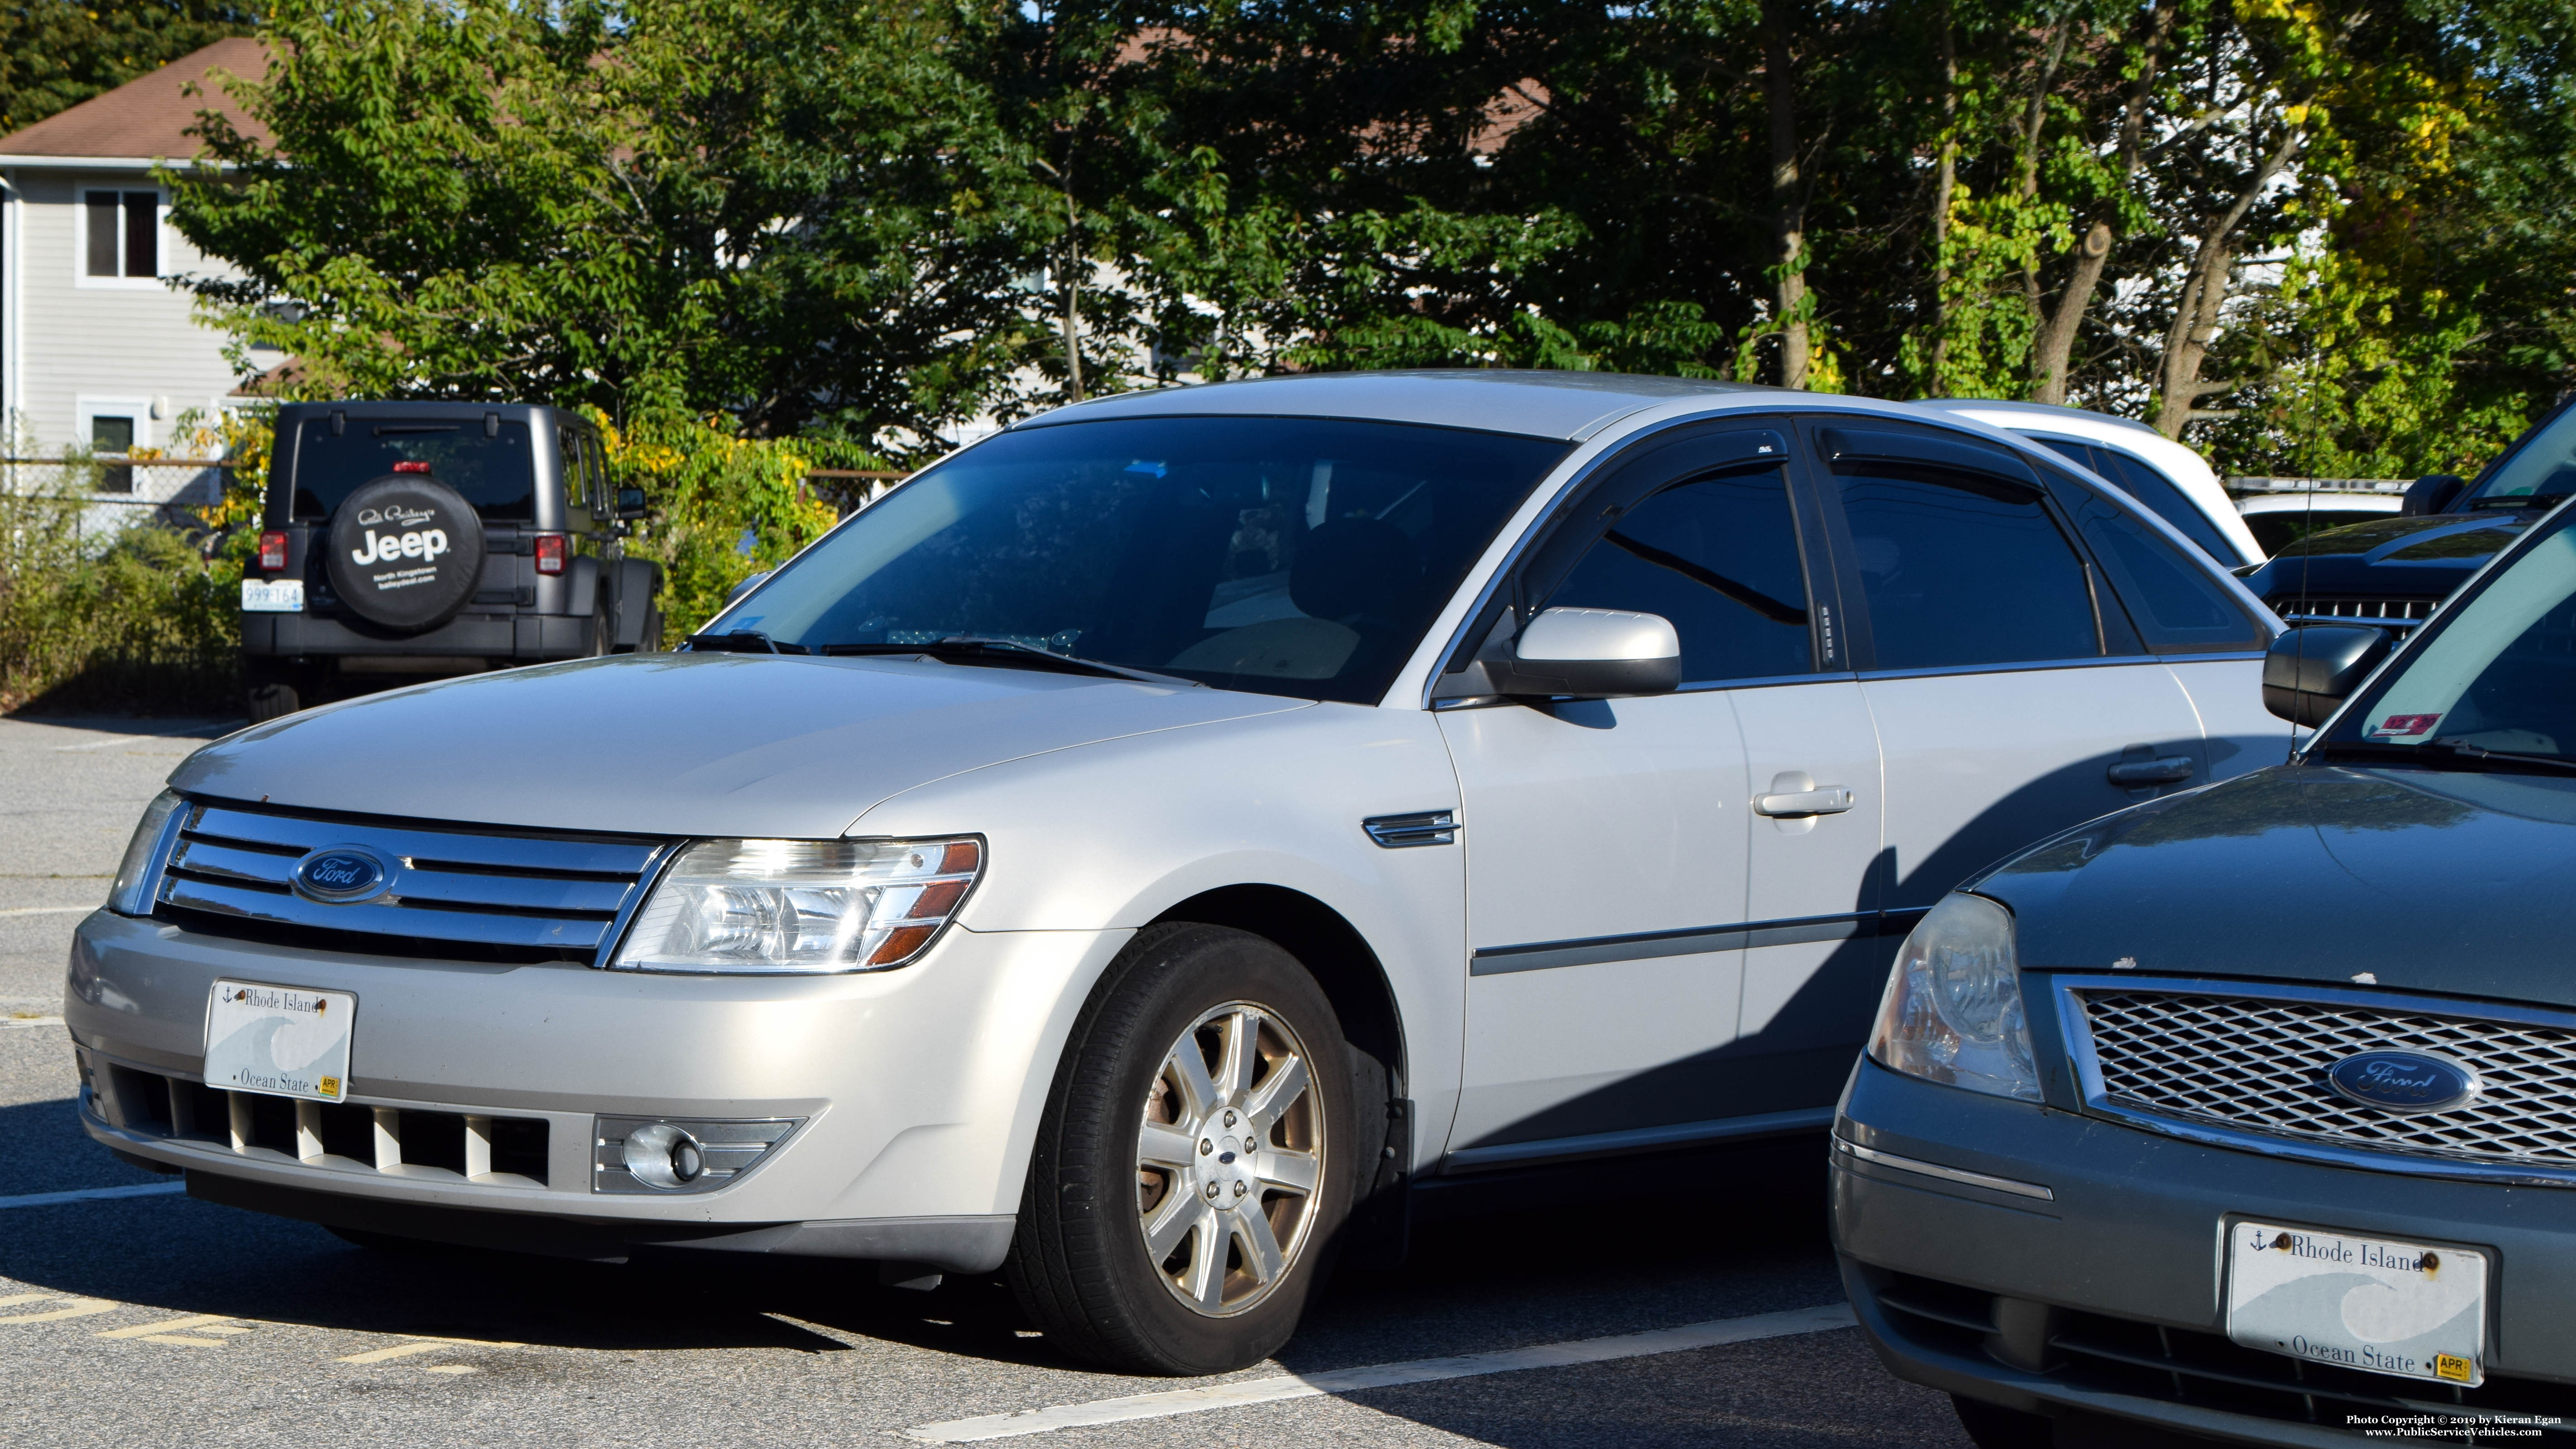 A photo  of North Kingstown Police
            Unmarked Unit, a 2008-2009 Ford Taurus             taken by Kieran Egan